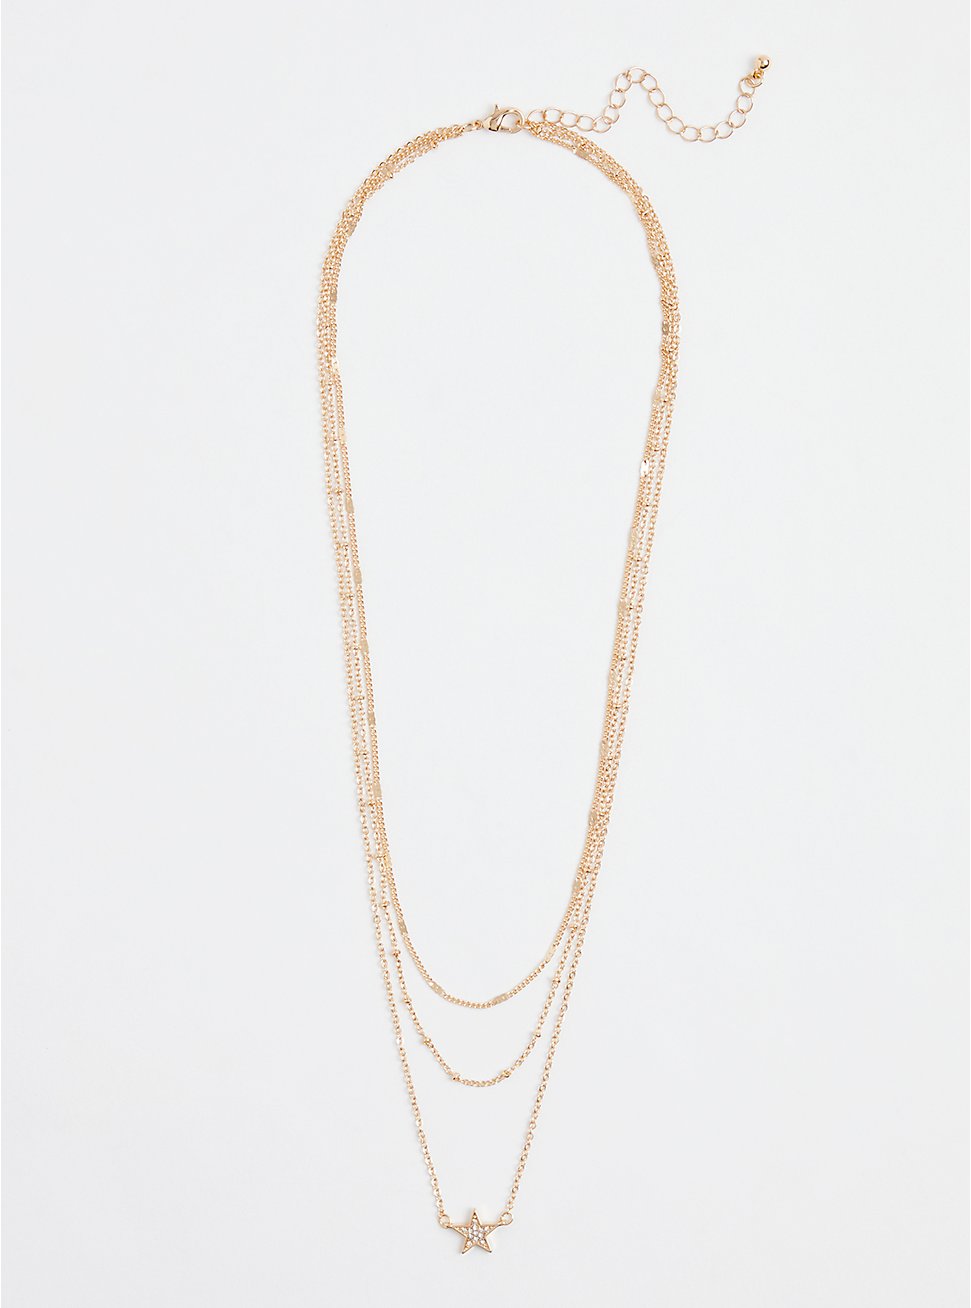 Delicate Layered Necklace With Star - Gold Tone, , hi-res